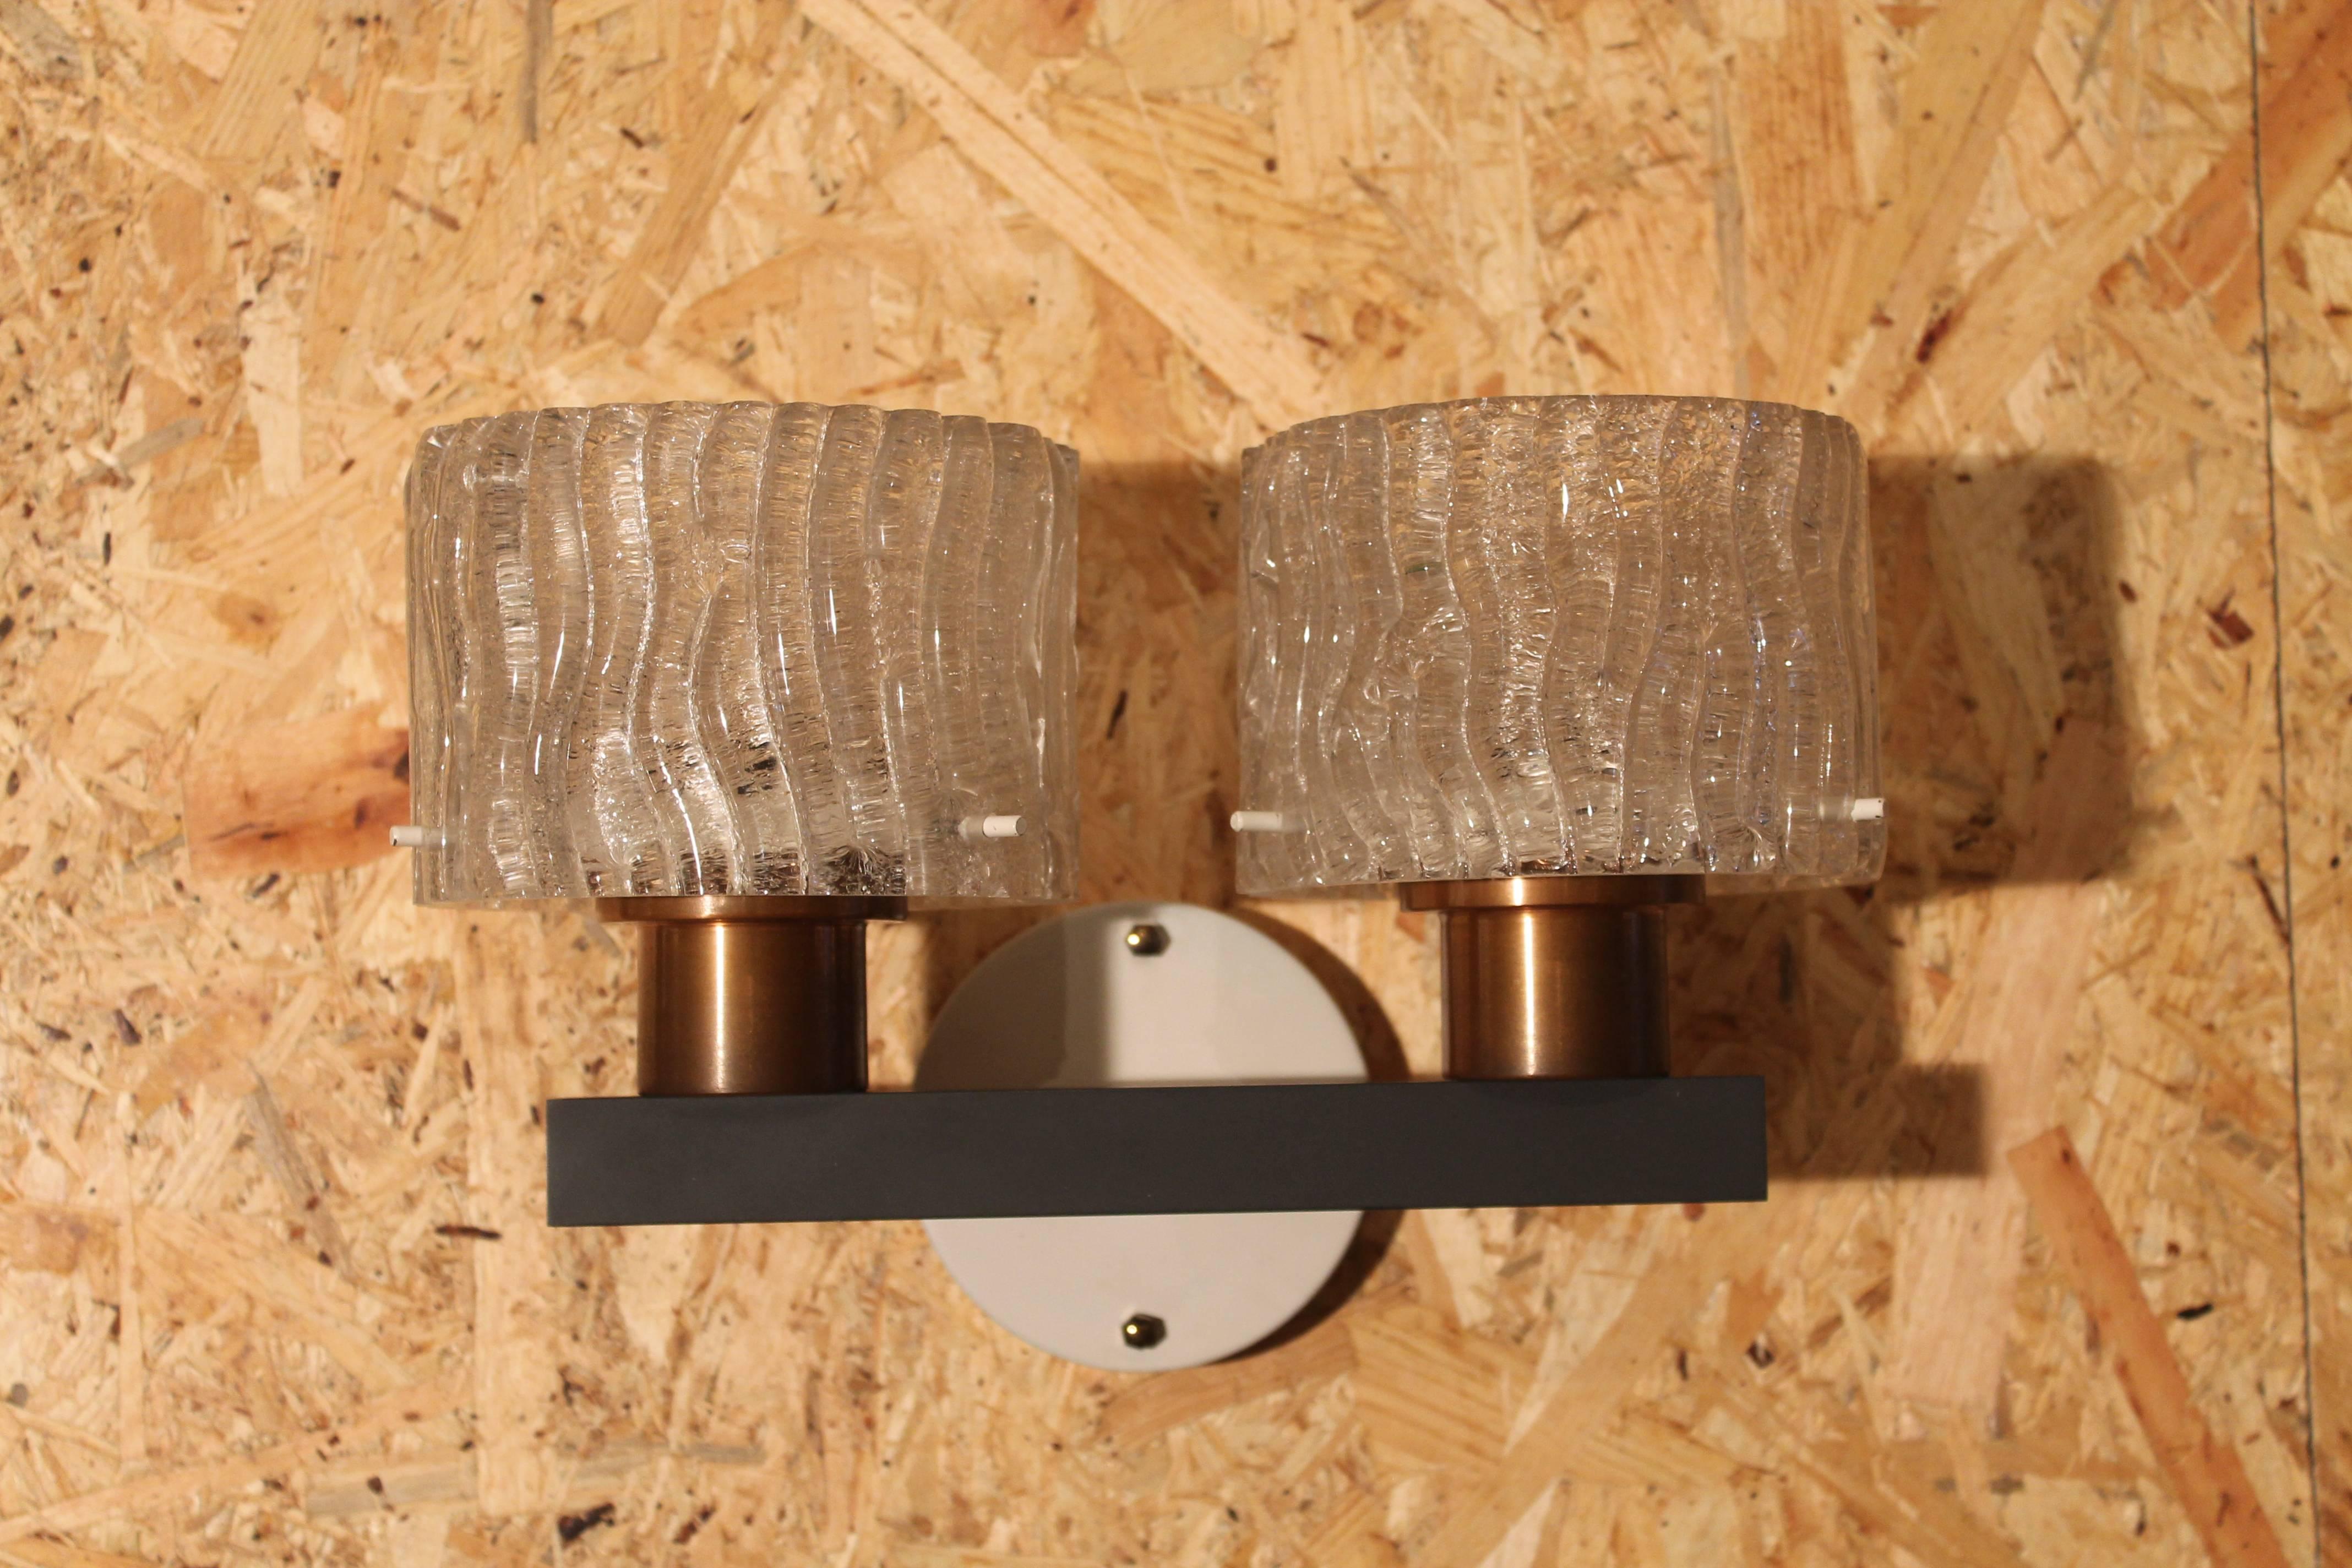 Pair of vintage glass and brass wall sconces by Philips, 1950s

ice glass with brass and metal hardware 

very good original and working condition

also wired for US use.